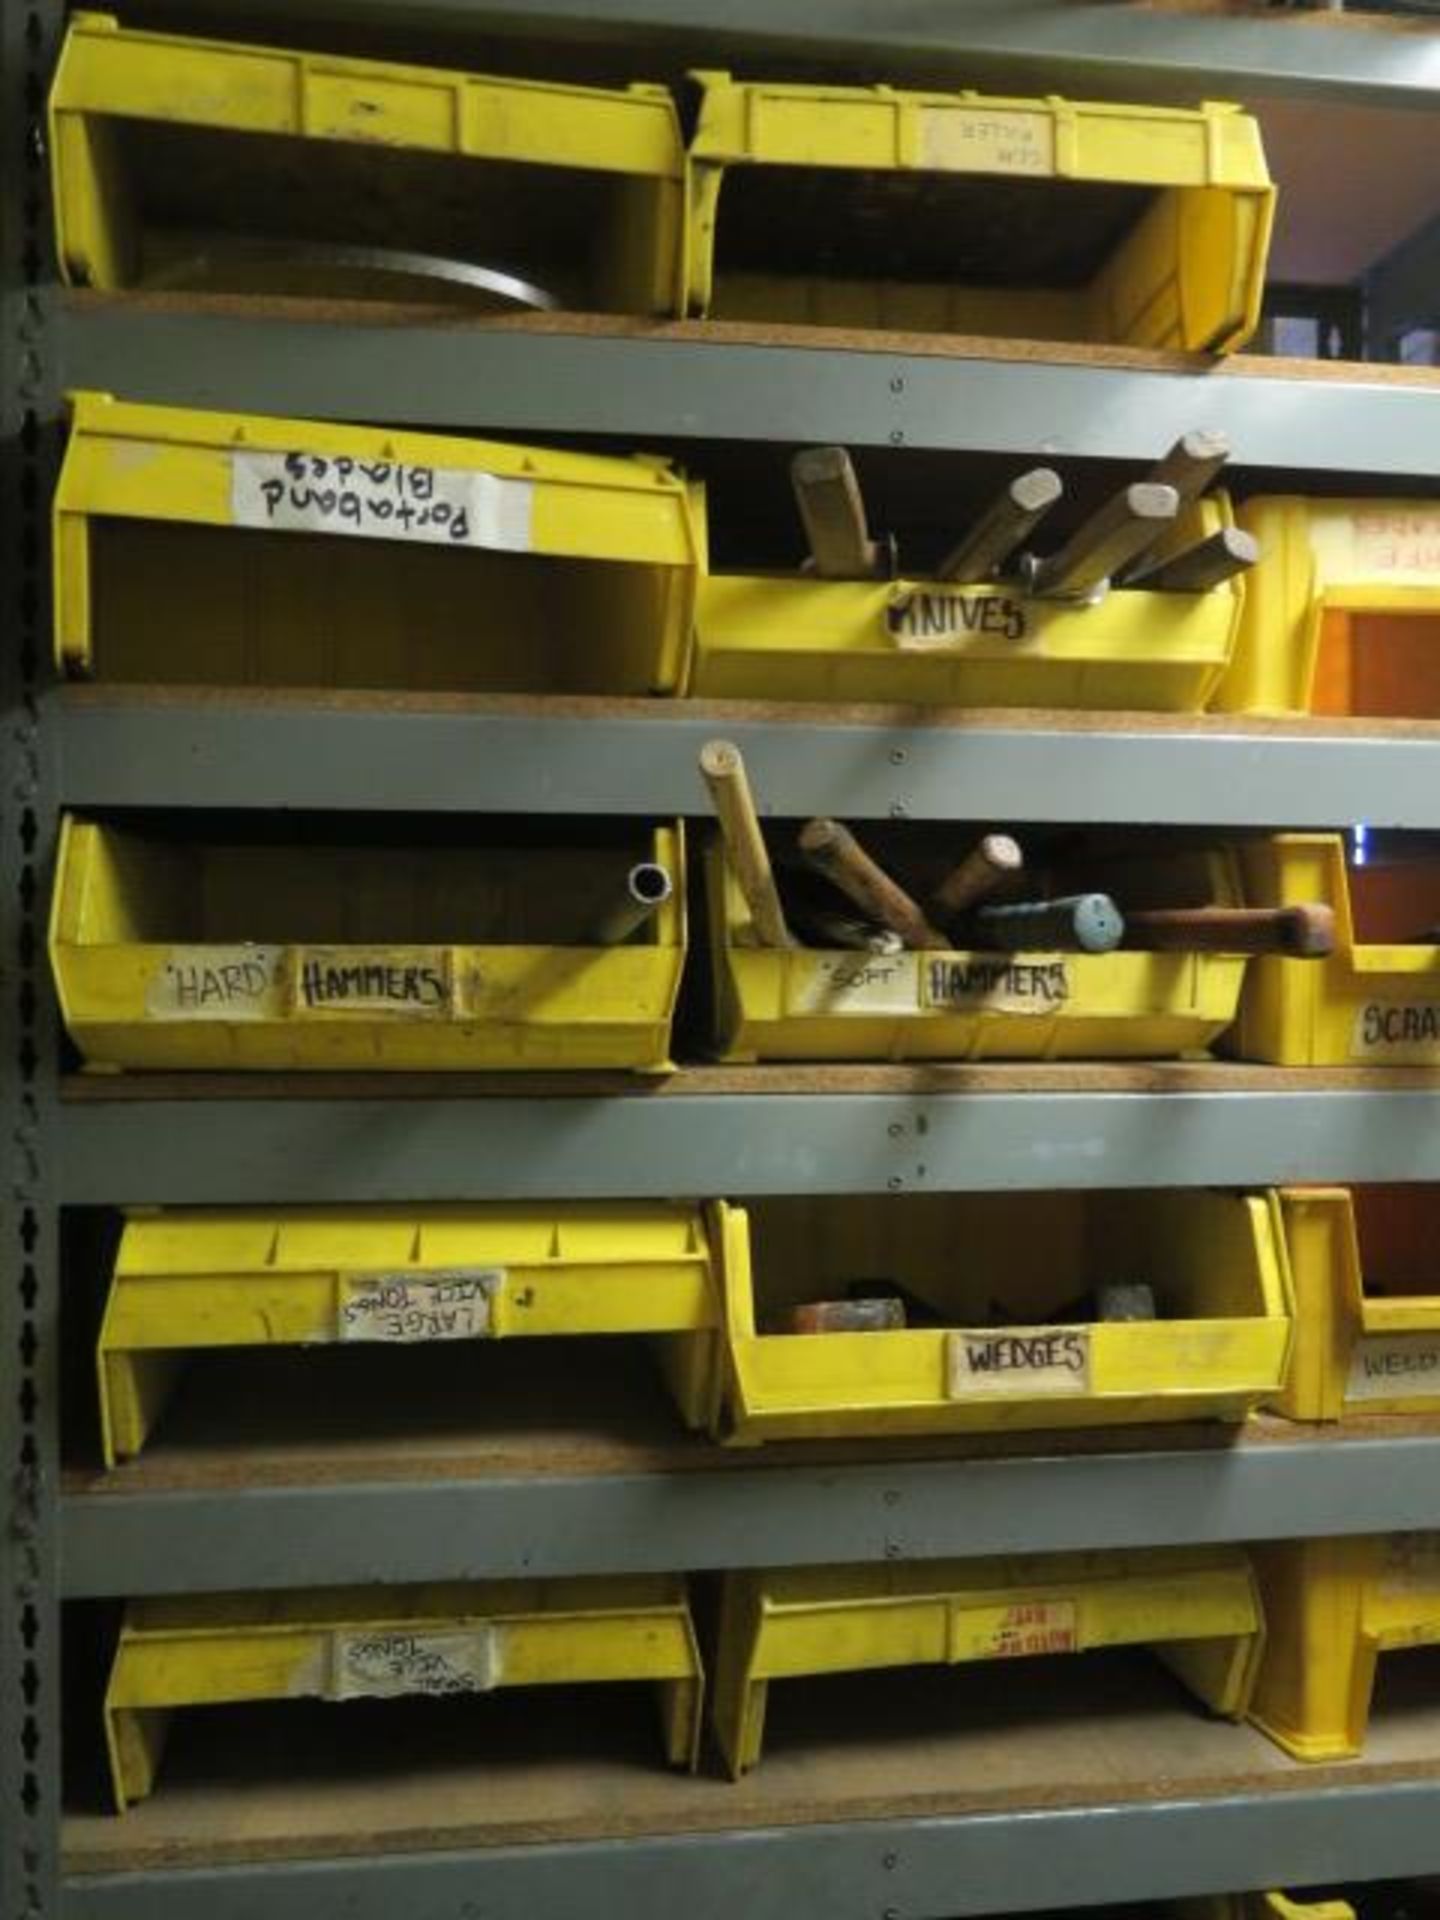 Storage Room w/ Bar Clamps, Hammers, Straps, Concrete Tools, Abrasives, Bins and Shelving (SOLD AS- - Image 8 of 29